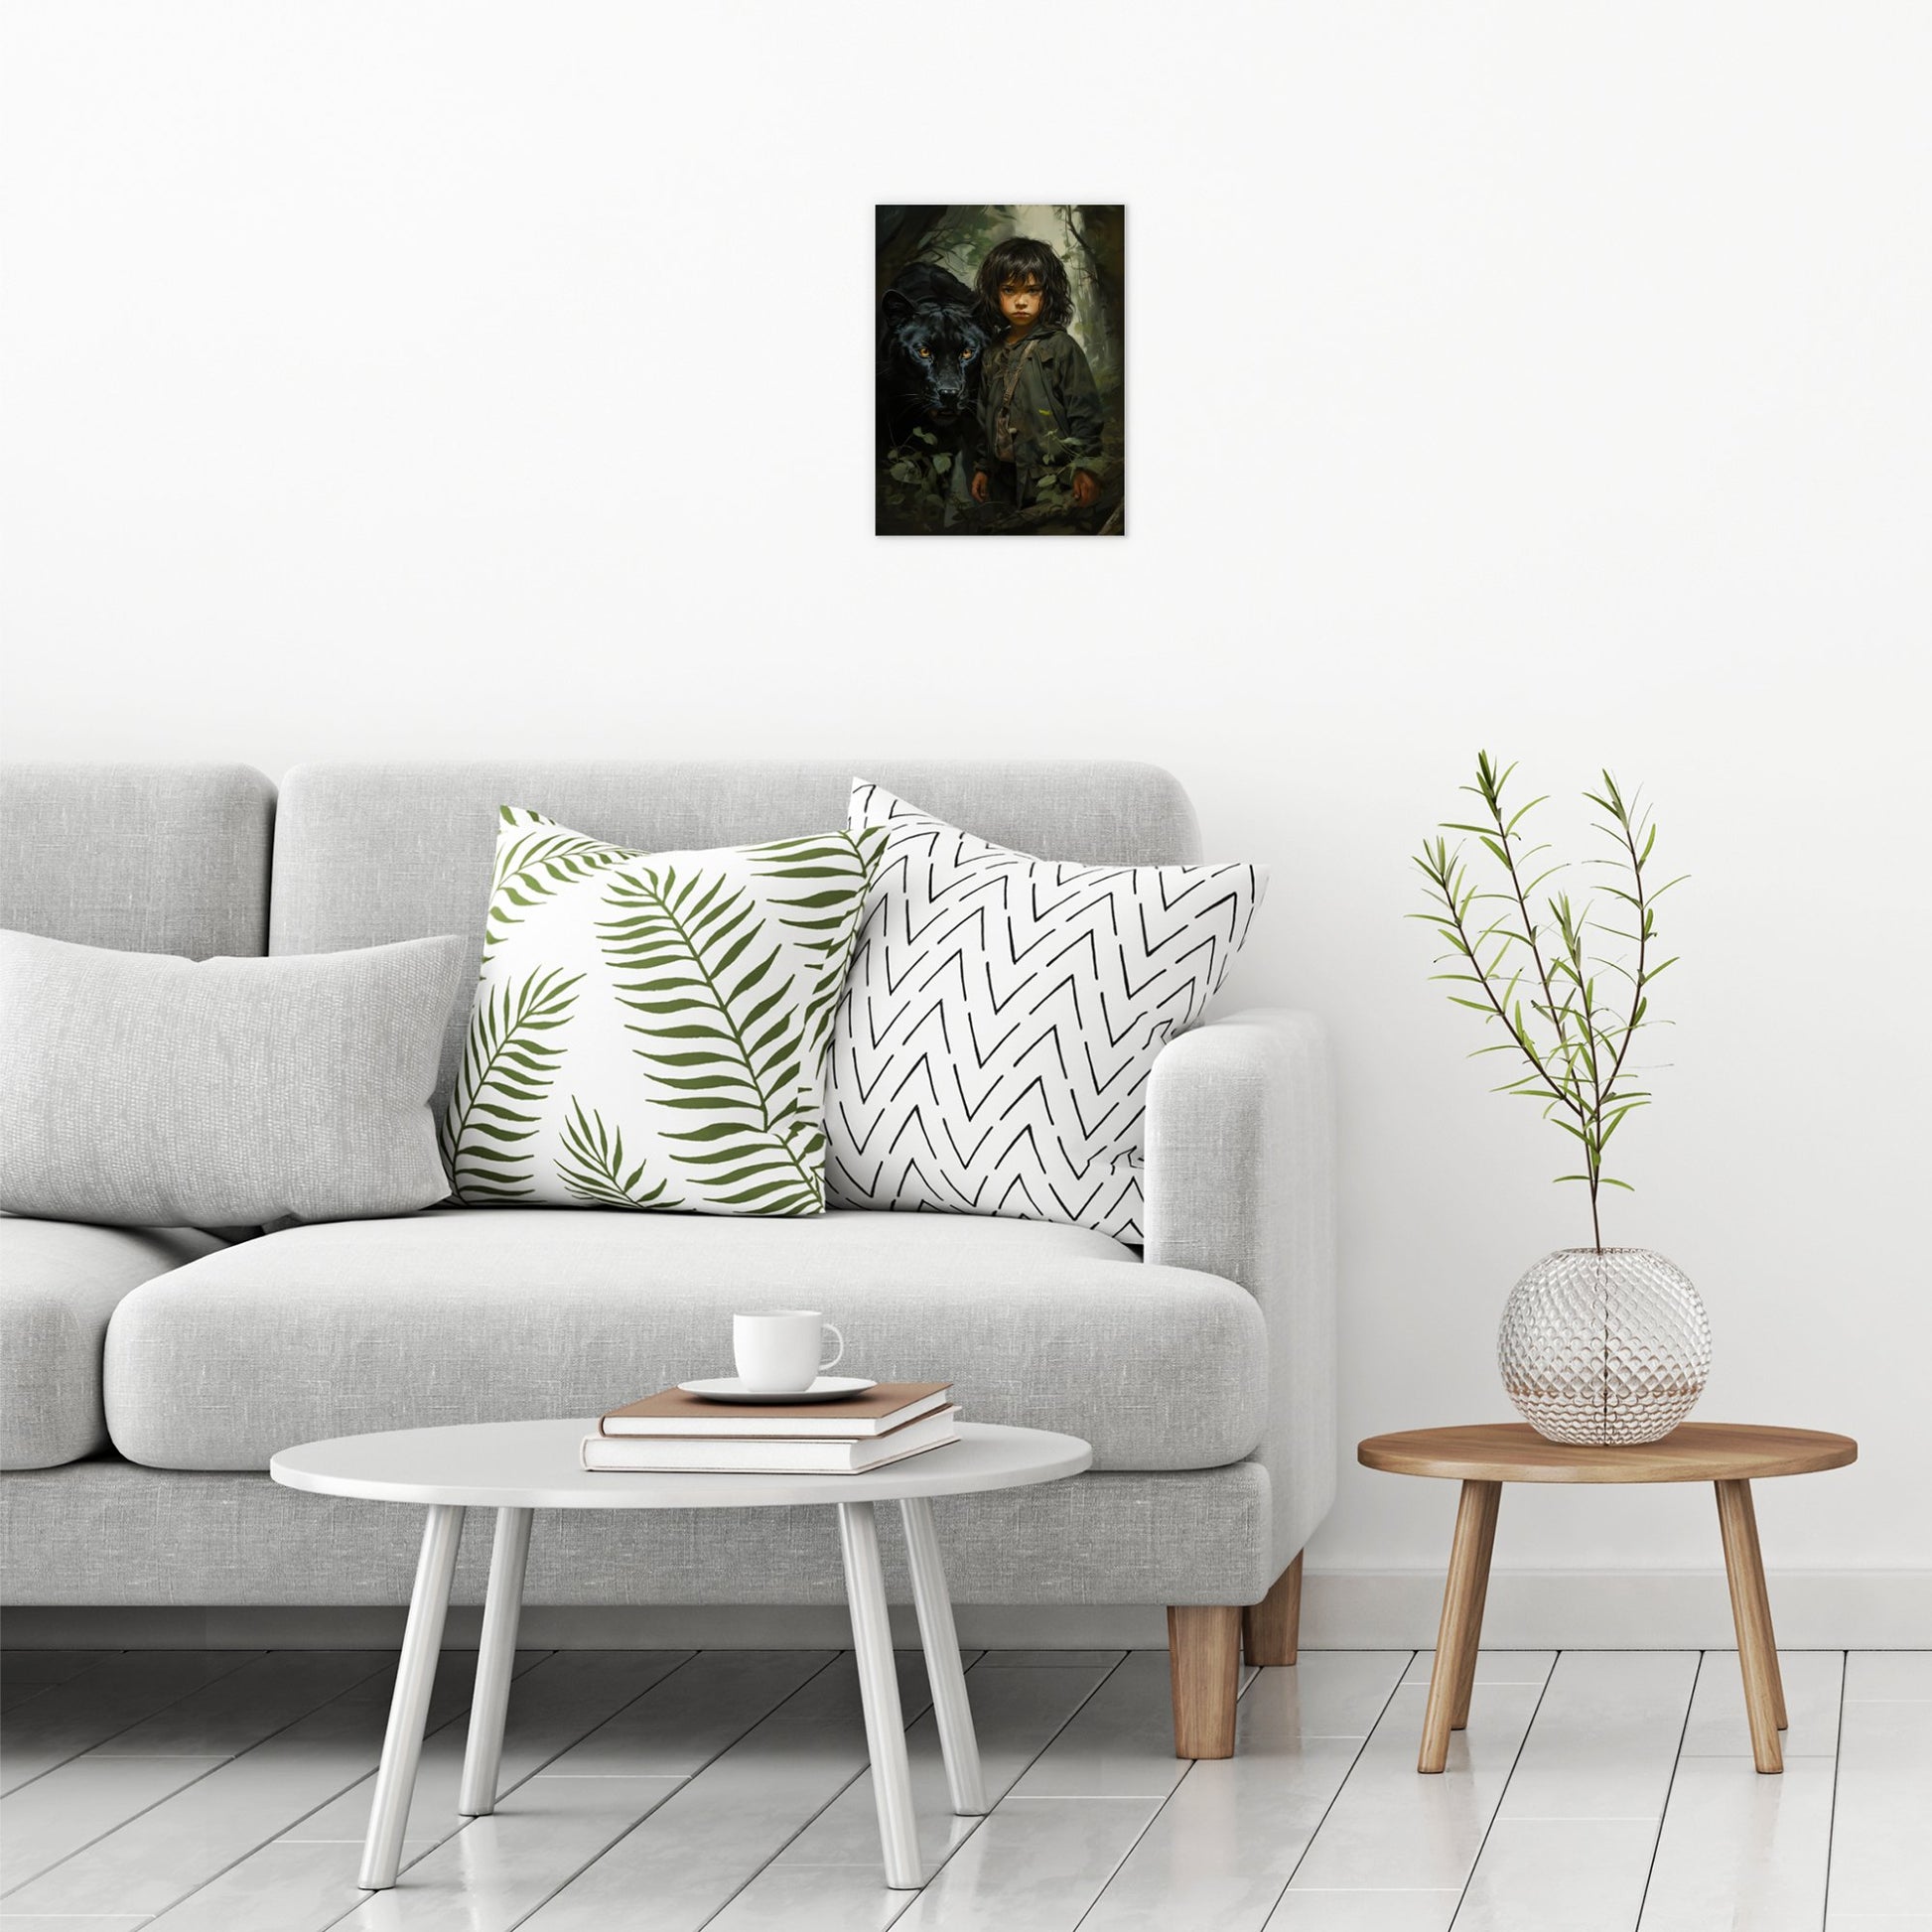 A contemporary modern room view showing a small size metal art poster display plate with printed design of a Boy and Black Panther Fantasy Painting